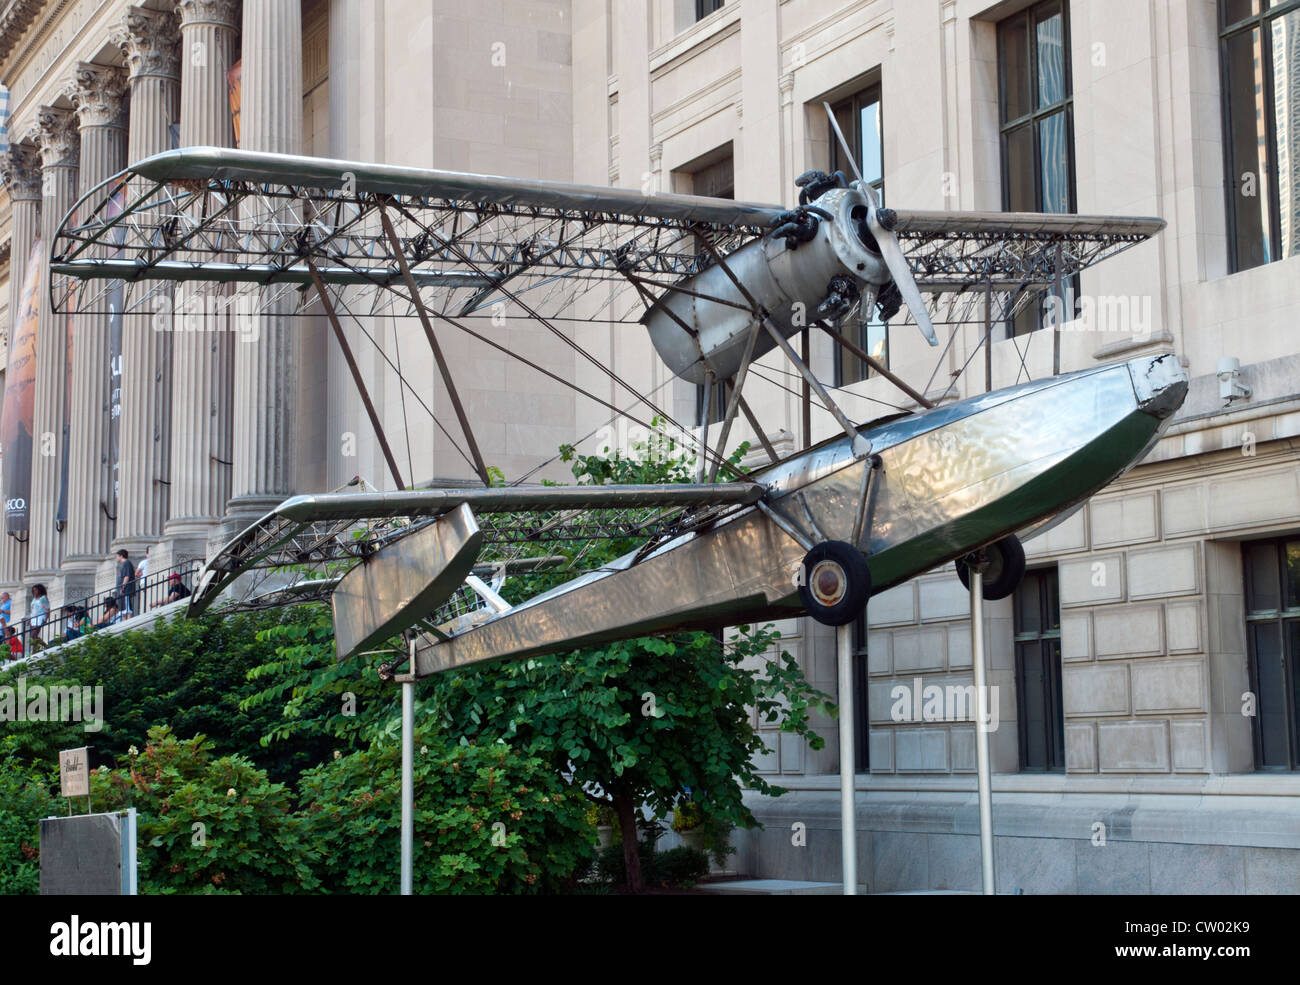 The first stainless steel airplane,built in 1931 year near The Franklin Institute , Philadelphia, Pennsylvania, USA Stock Photo